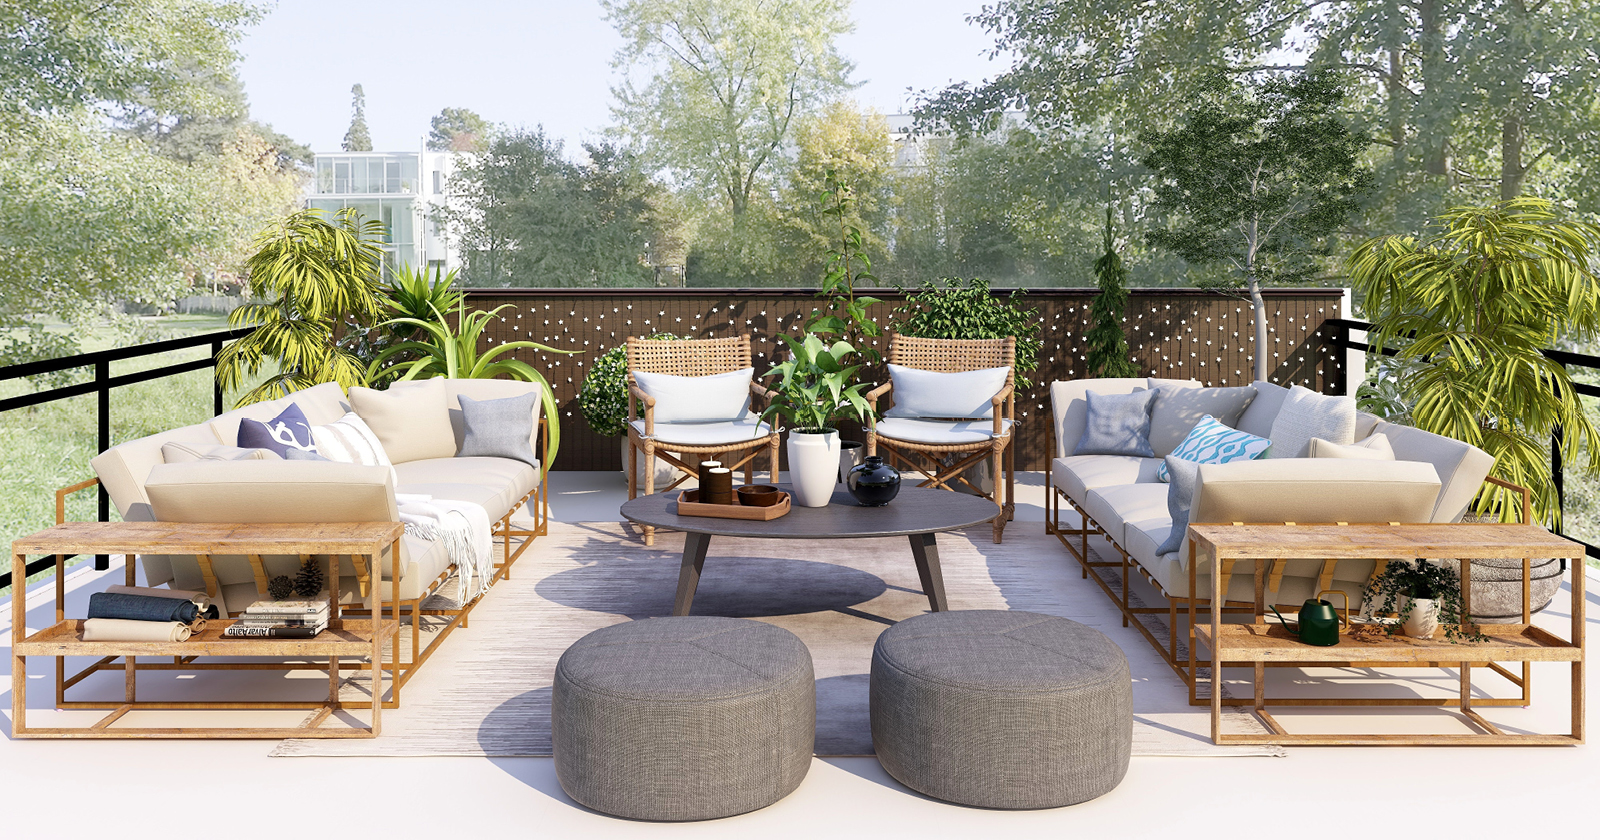 6 Ideas to Spice Up Your Outdoor Area on a Budget